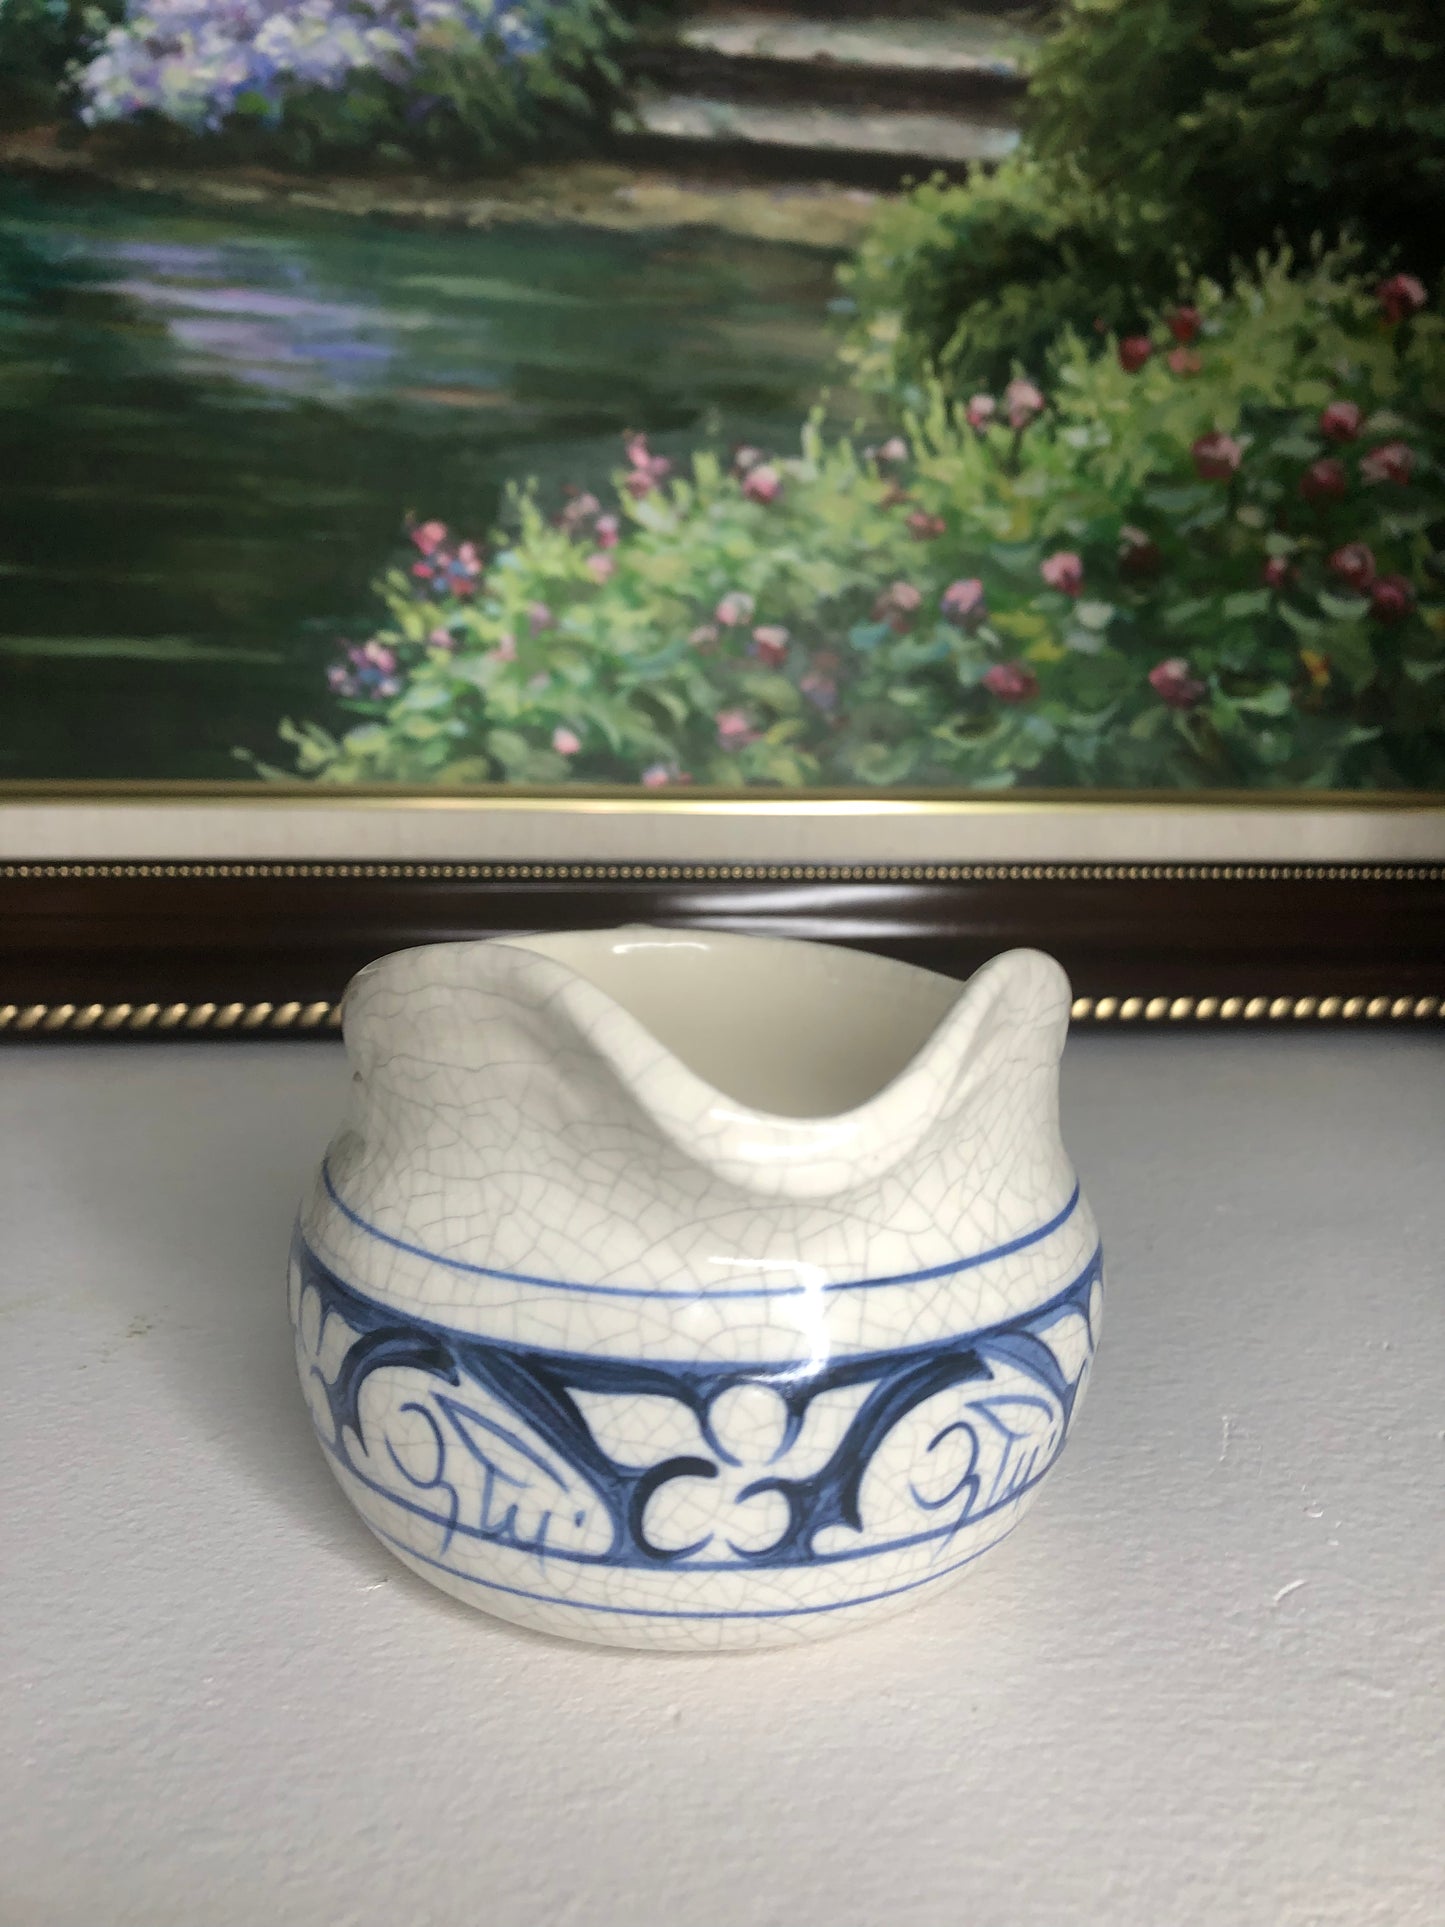 Vintage Dedham Pottery Bunny blue and white gravy boat - Excellent condition!